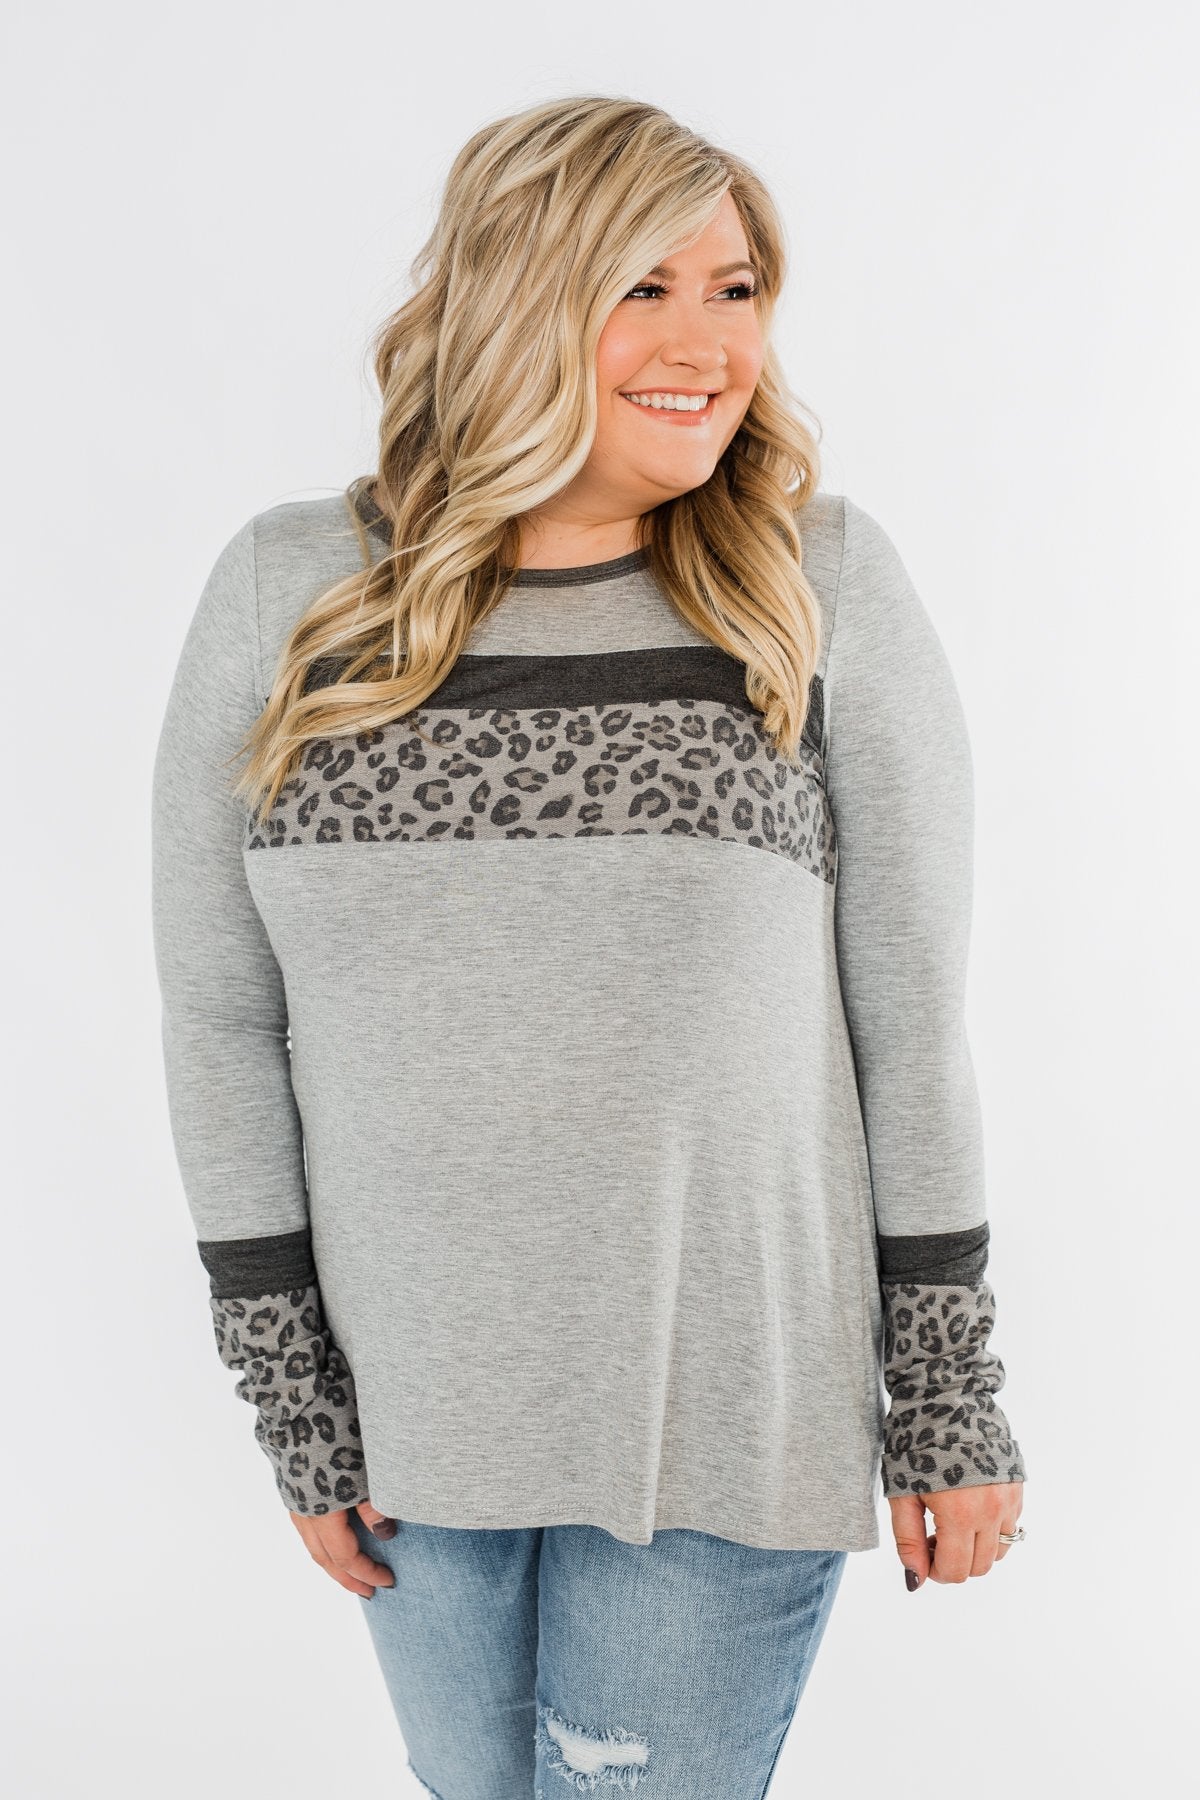 Can't Stop Smiling Long Sleeve Top- Grey